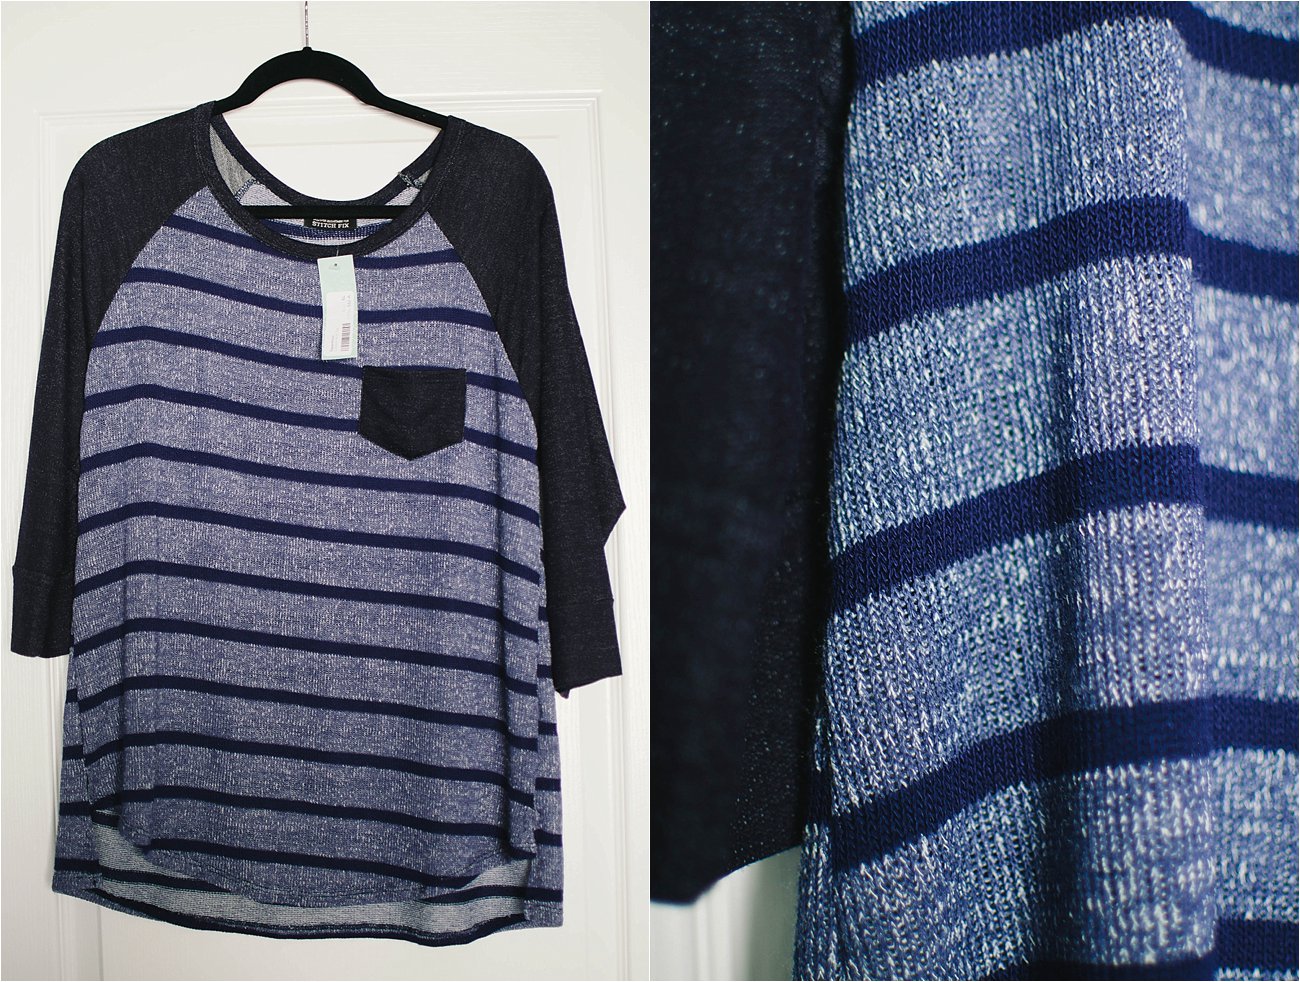 Papermoon "Cresson Knit Top"